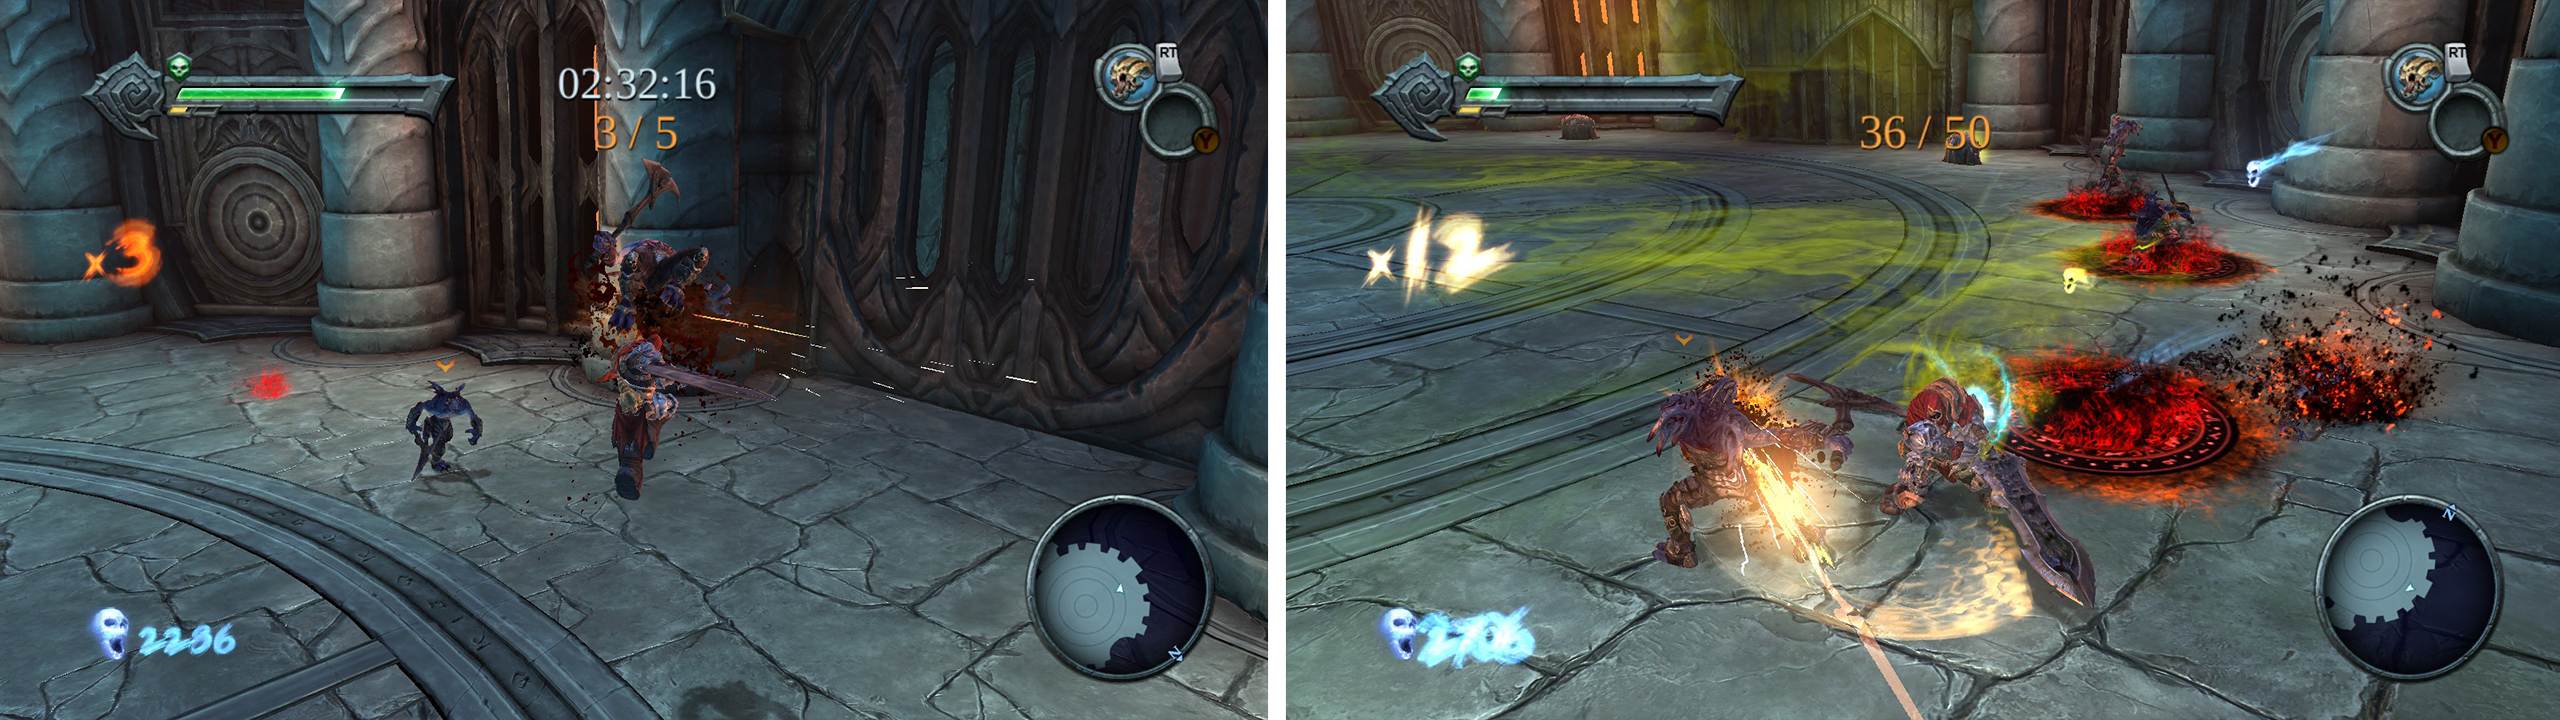 Make sure to launch and juggl enemies during the first challenge (left). Kill enemies as quickly as possible in the second challenge to prevent damage over time killing you (right).